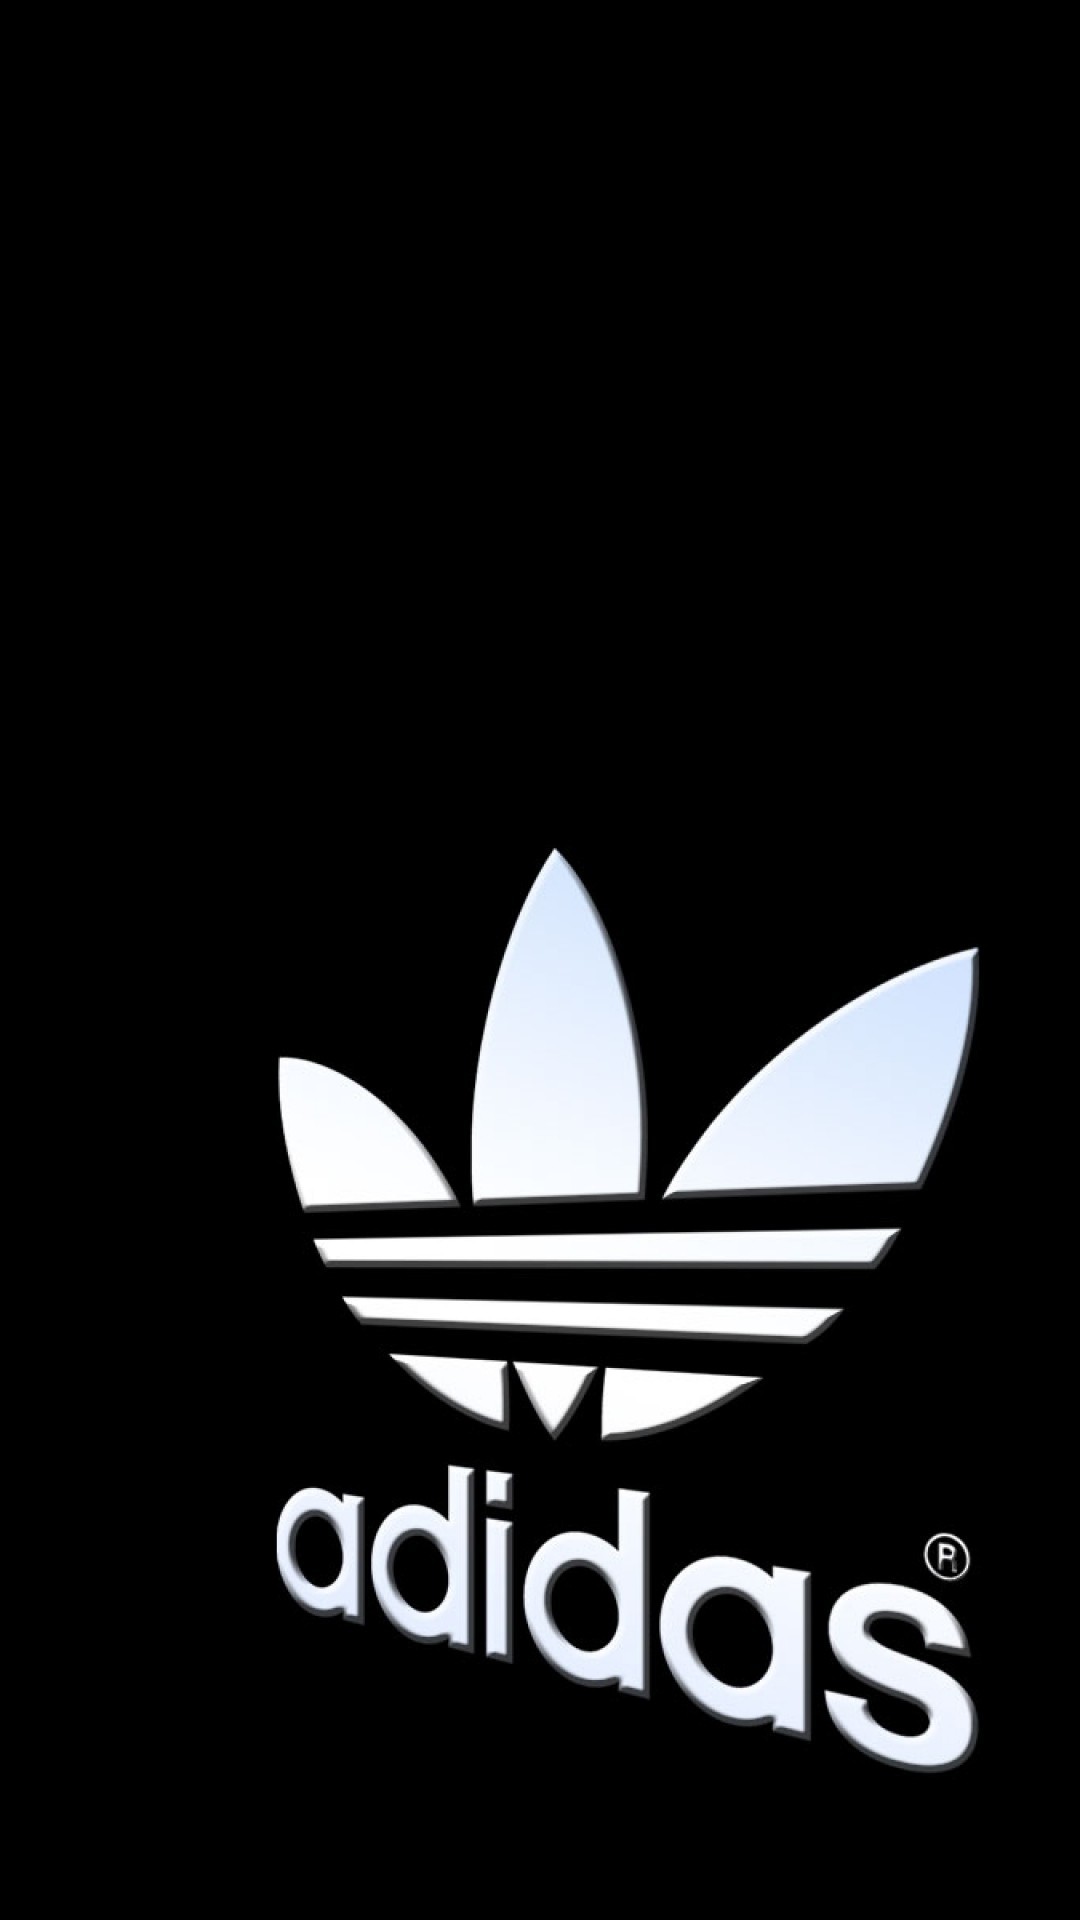 Phones Wallpaper Adidas Logo with high-resolution 1080x1920 pixel. Download all Mobile Wallpapers and Use them as wallpapers for your iPhone, Tablet, iPad, Android and other mobile devices